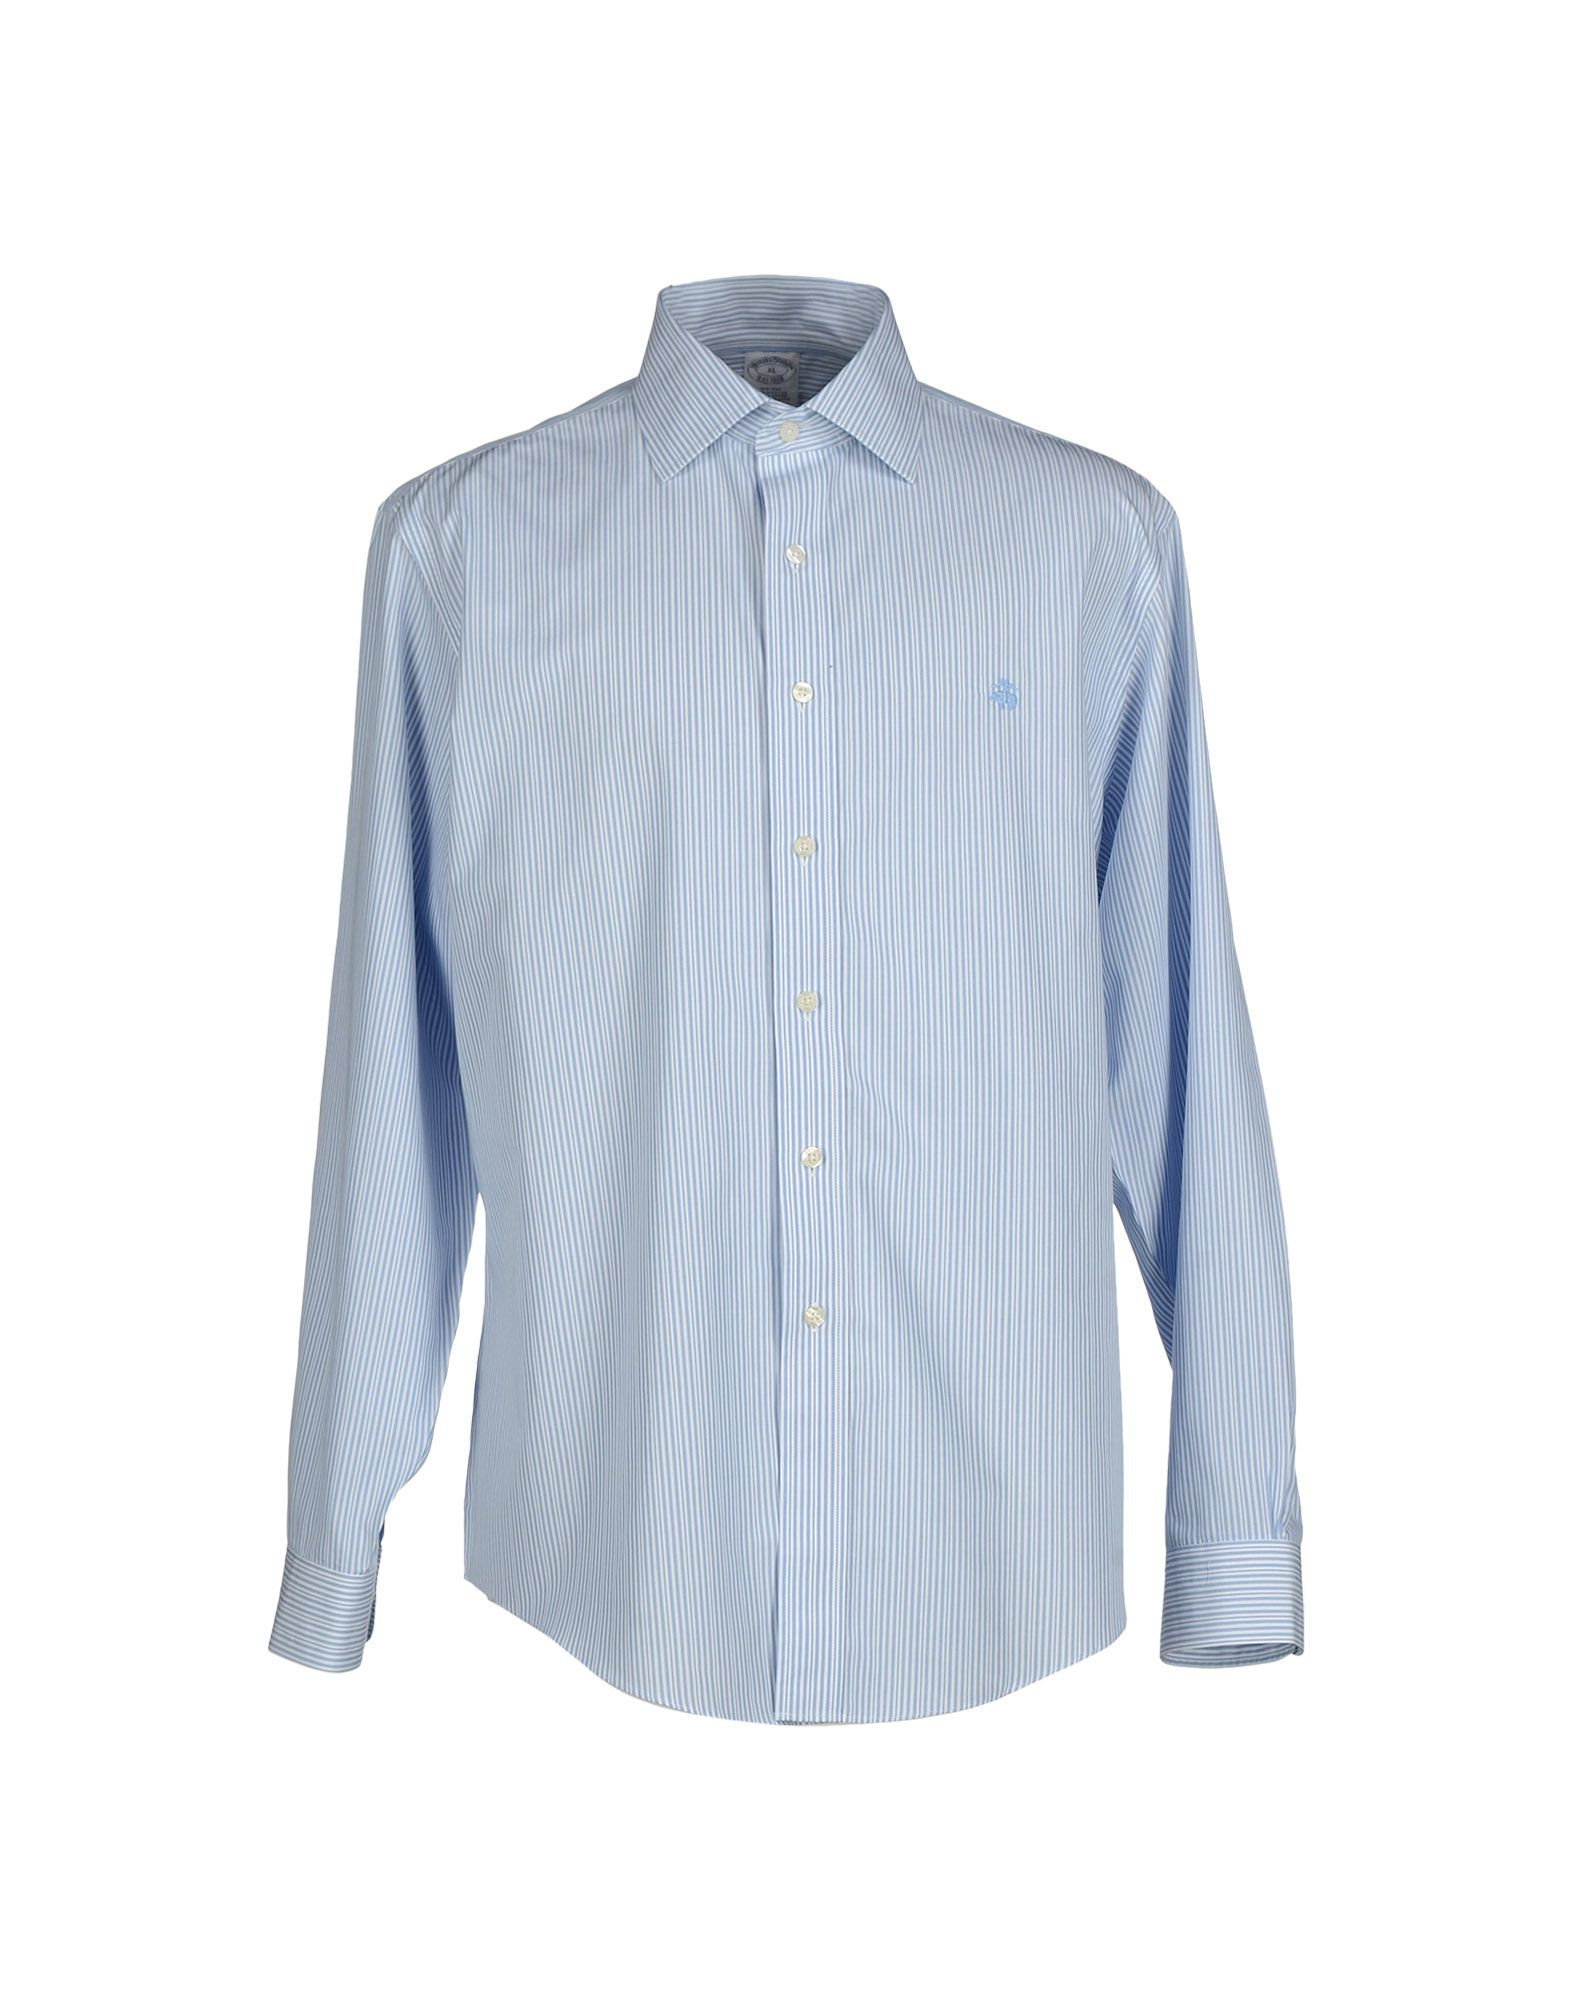 Lyst - Brooks Brothers Shirt in Blue for Men